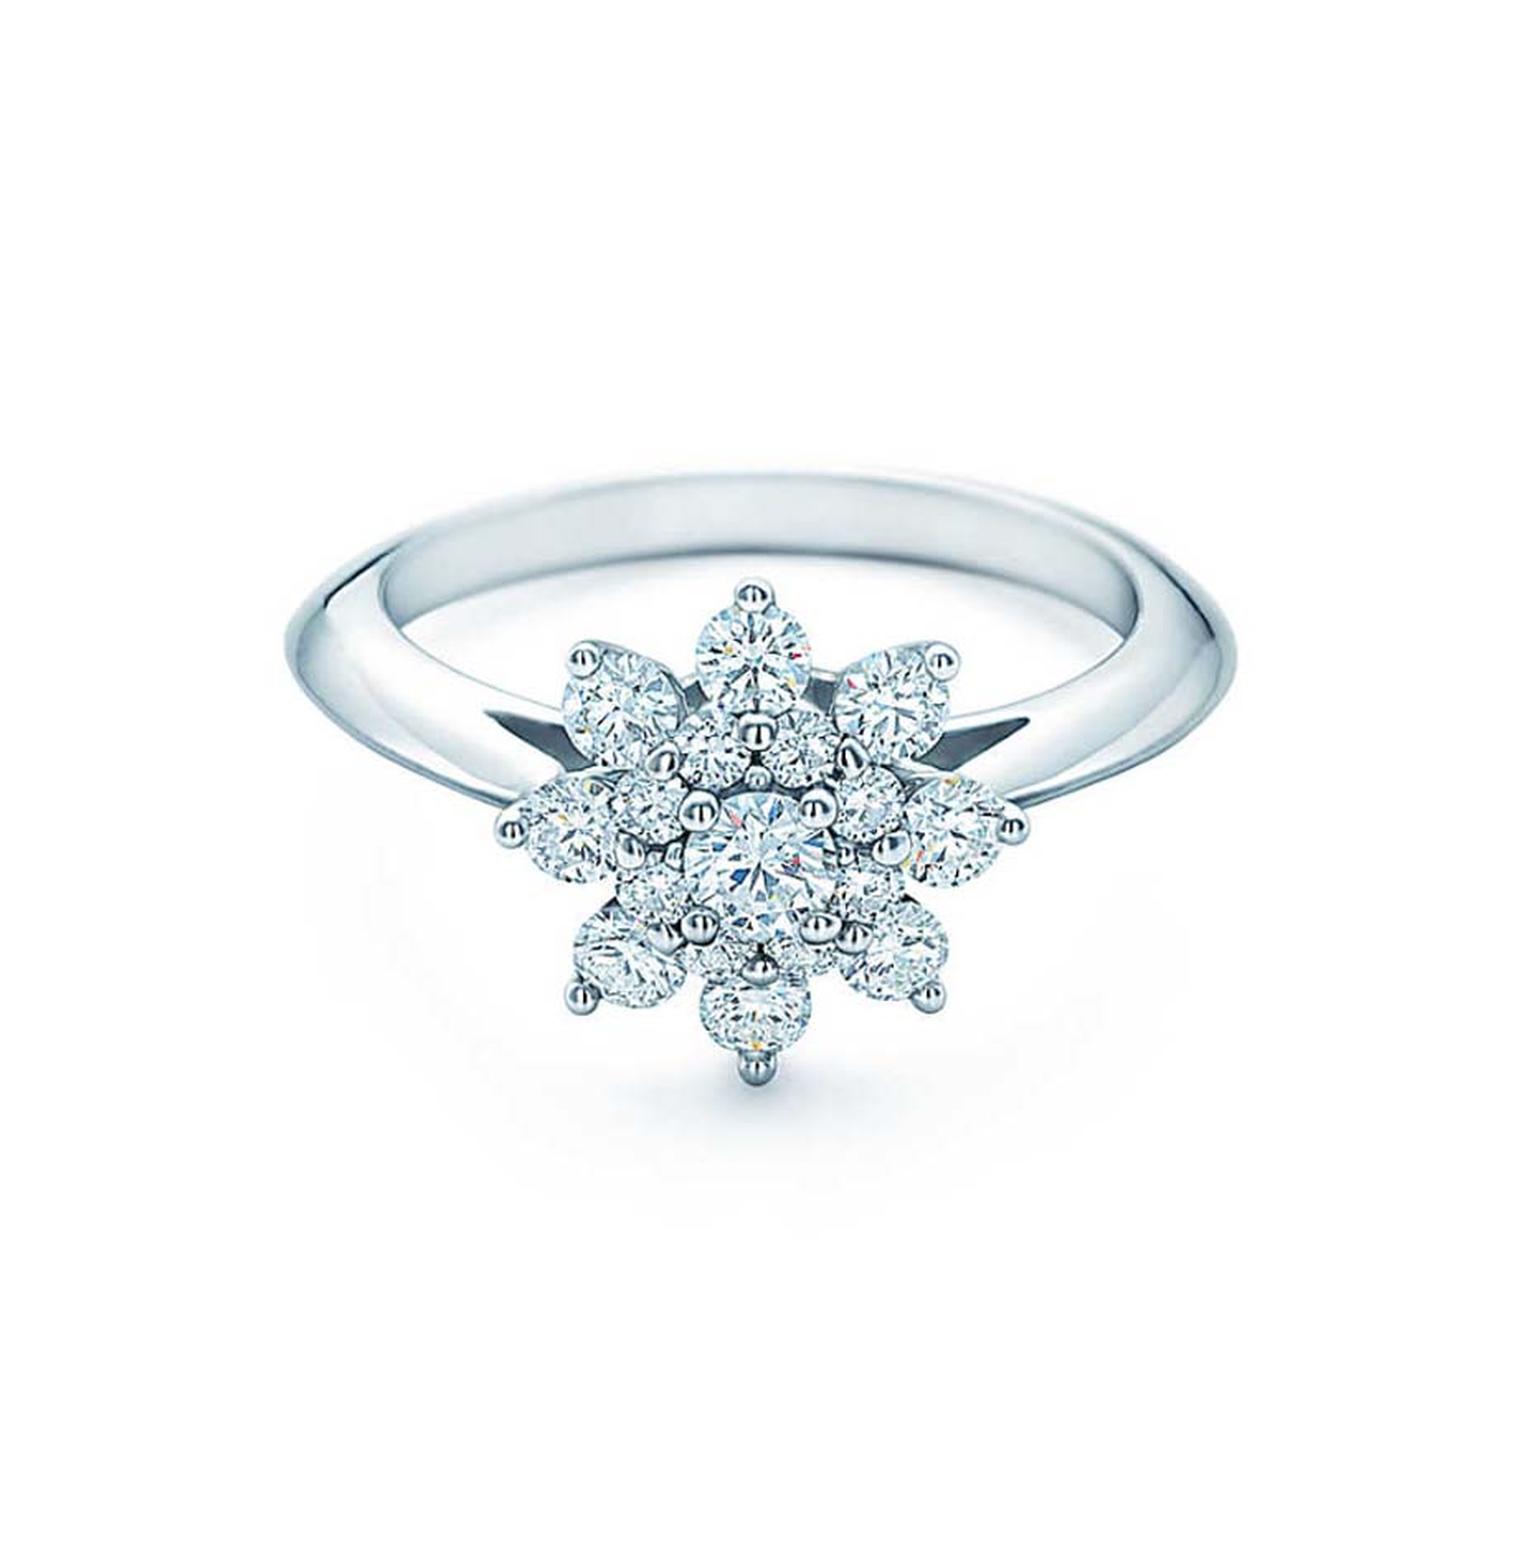 Tiffany & Co. Flower engagement ring, with petals of round brilliant diamonds surrounding a centre diamond.